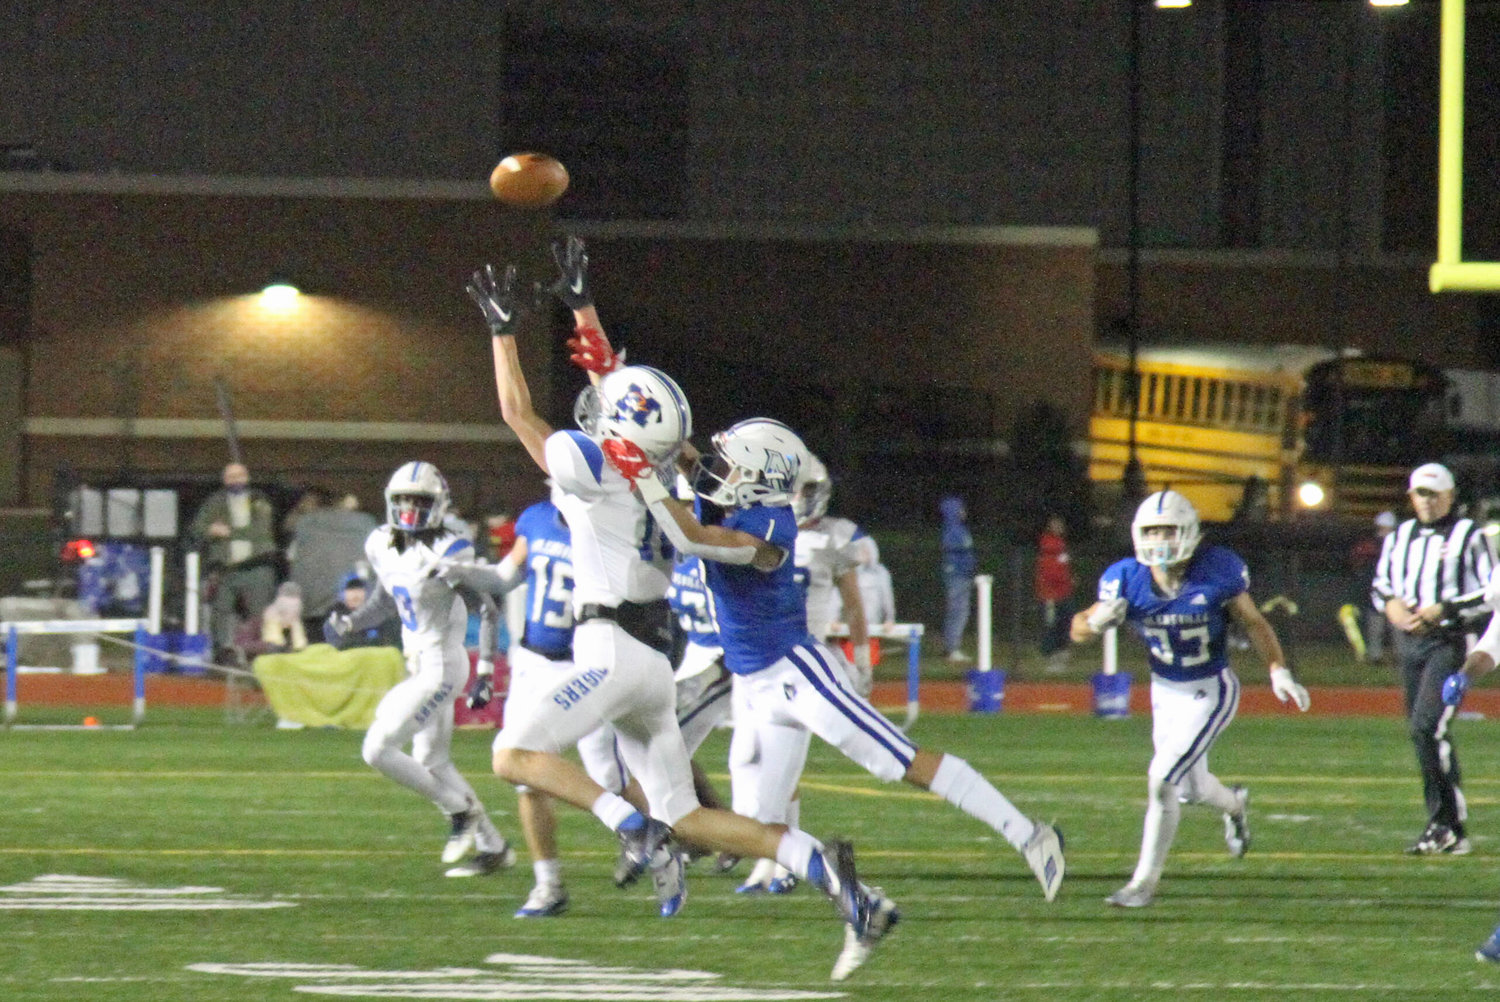 Christian Stacey goes up high for a Bryson Hammons pass in the Tigers’ 35-28 loss at Nolensville Friday night.